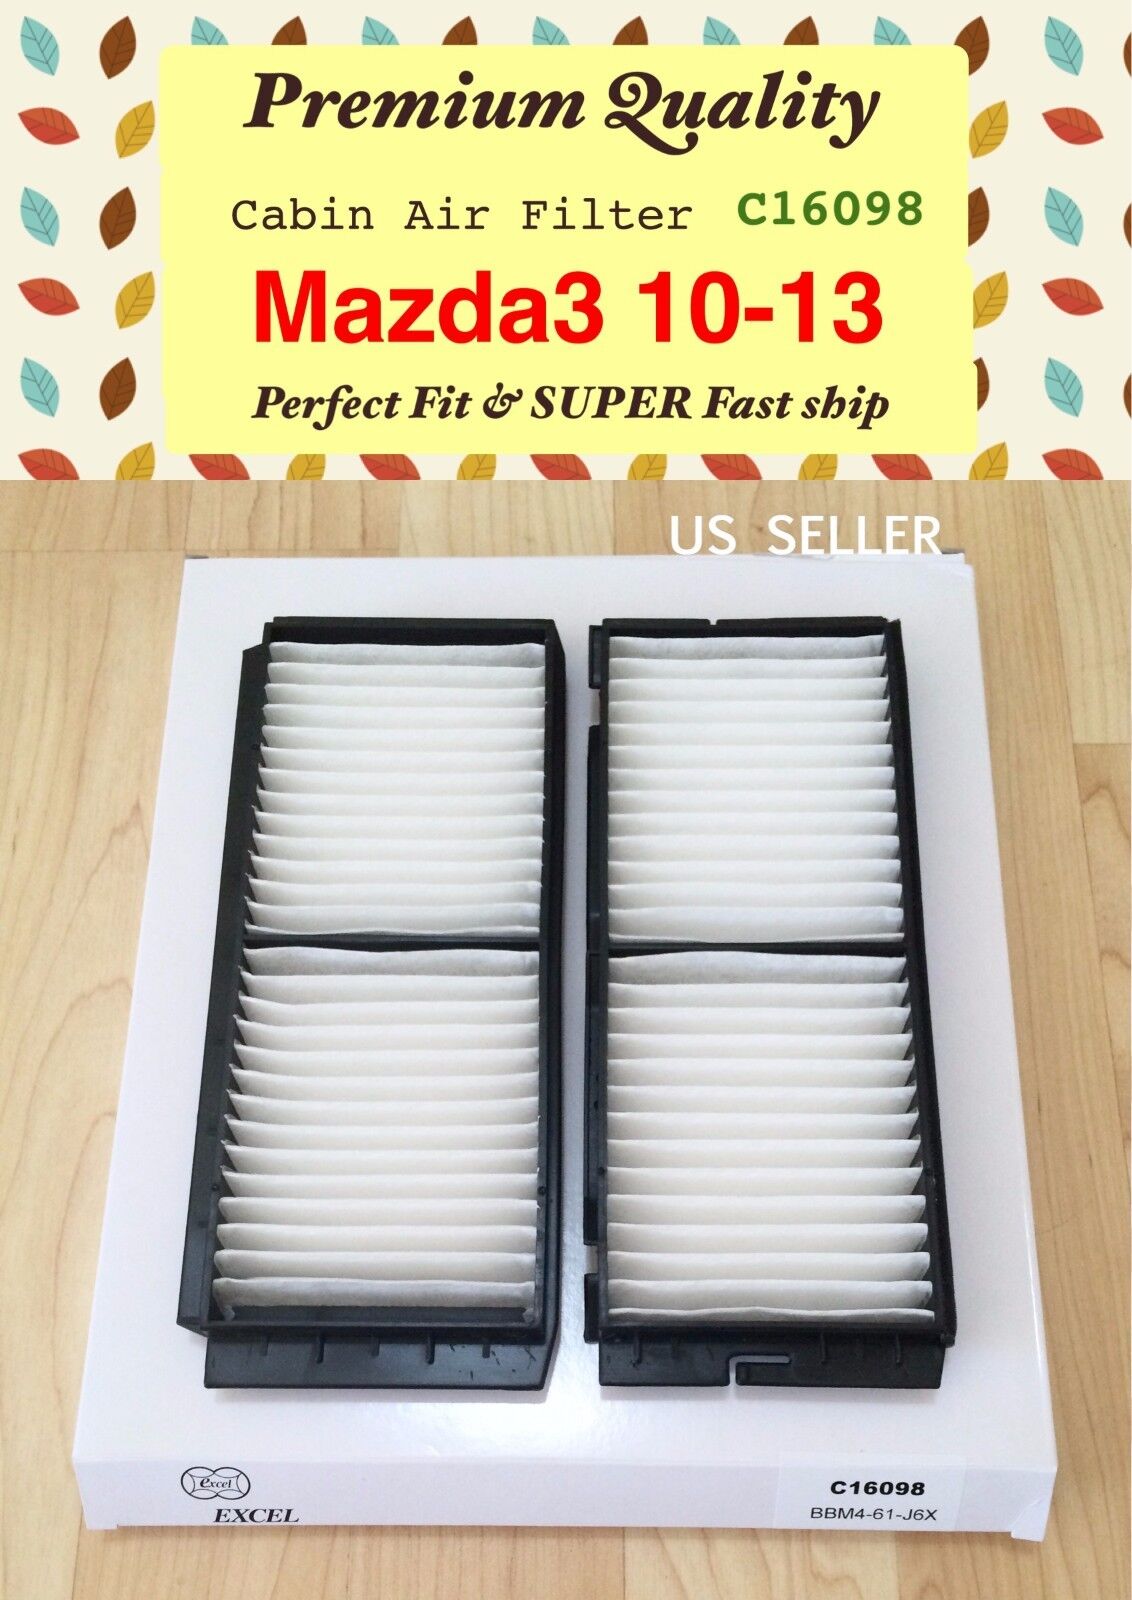 CABIN AIR FILTER For 2010 2011 2012 2013 Mazda3 & Mazdaspeed High Quality C16098